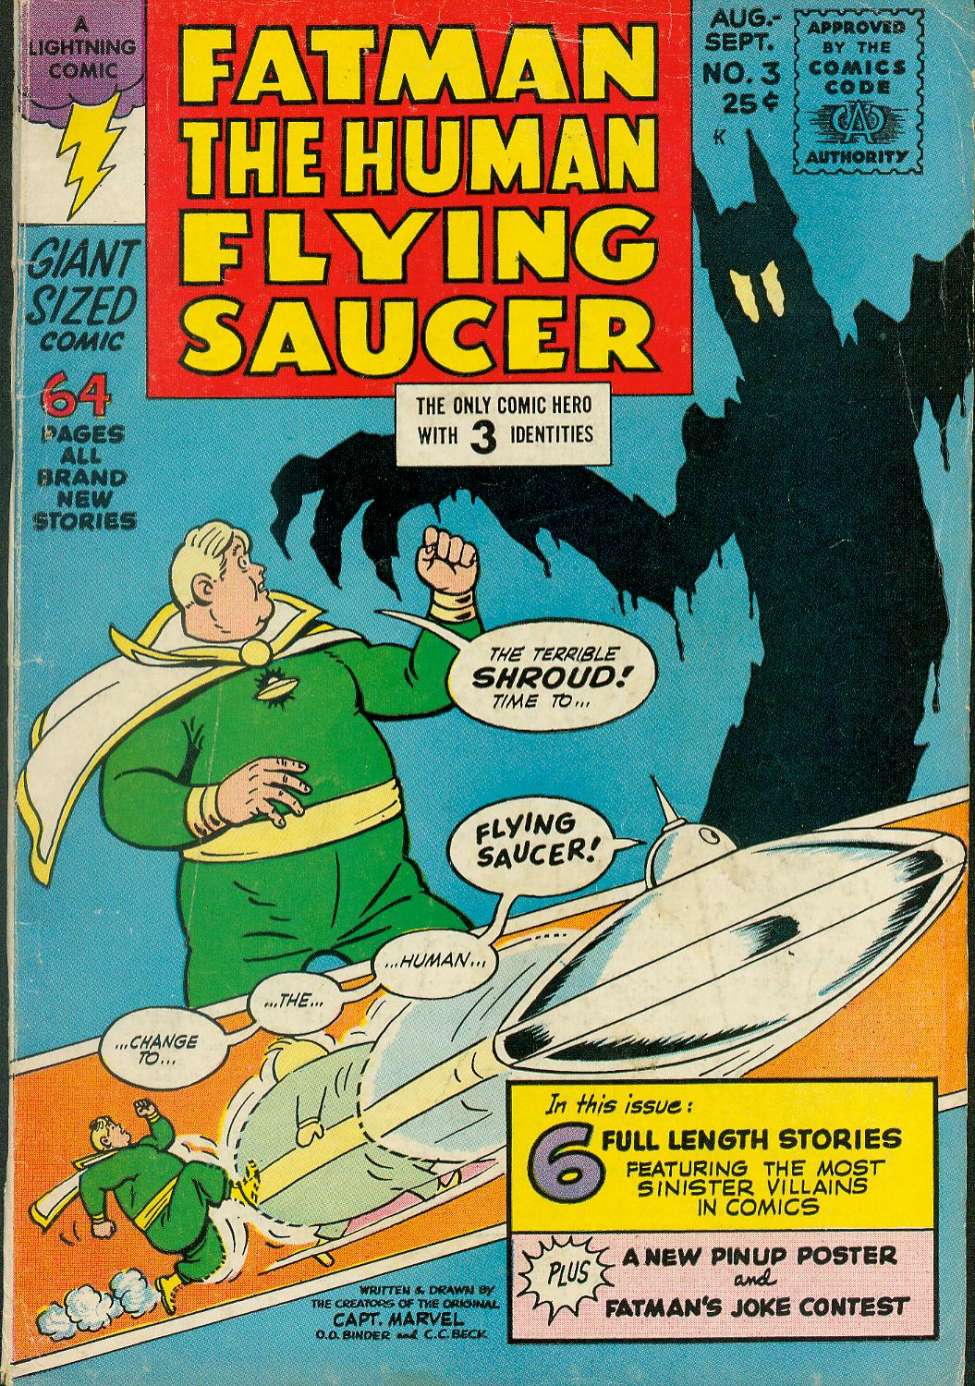 Book Cover For Fatman the Human Flying Saucer 3